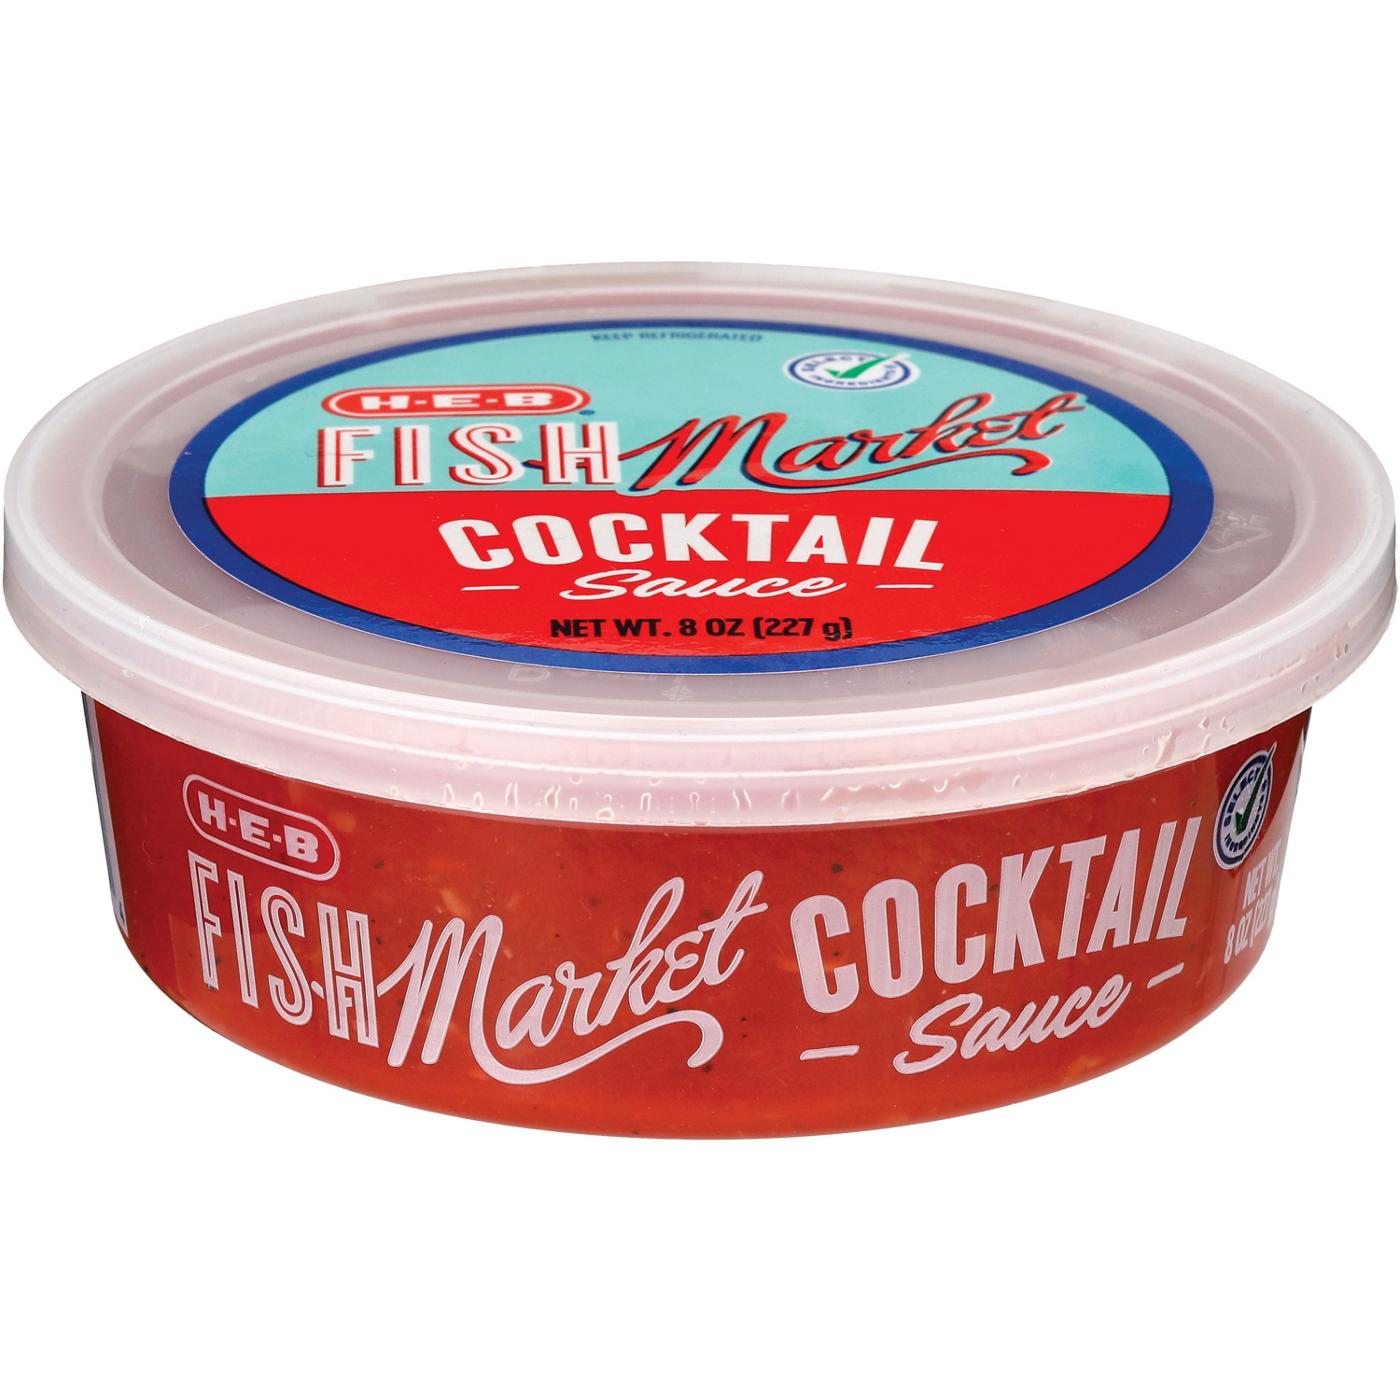 H-E-B Fish Market Cocktail Sauce (Sold Cold); image 2 of 2